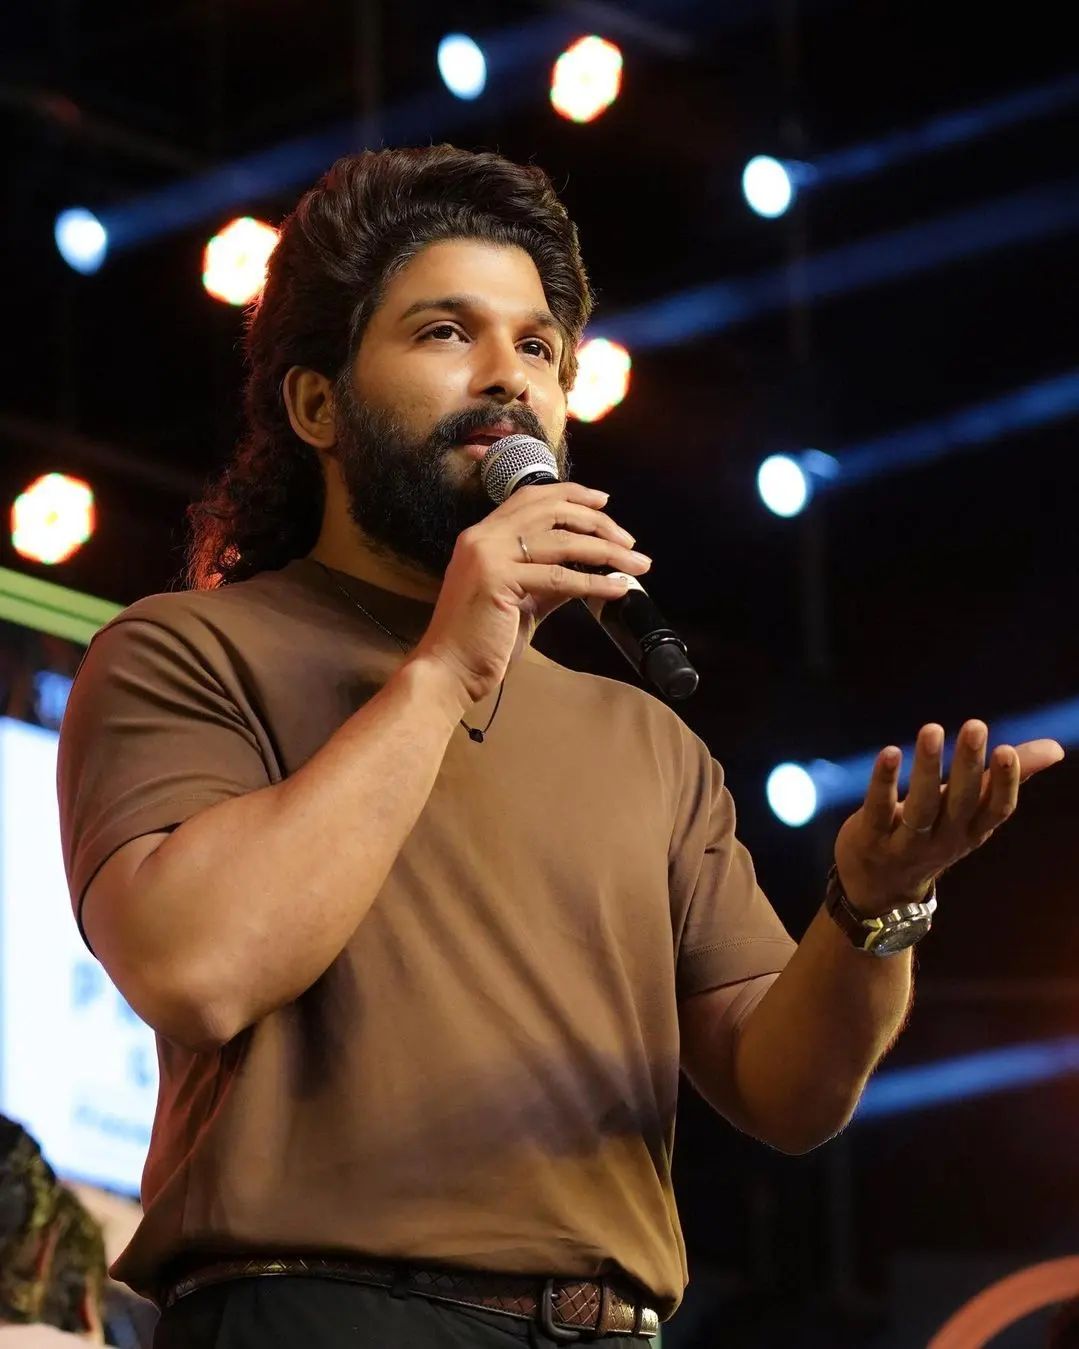 Allu Arjun: Do you know the cost of the watch worn by Bunny?